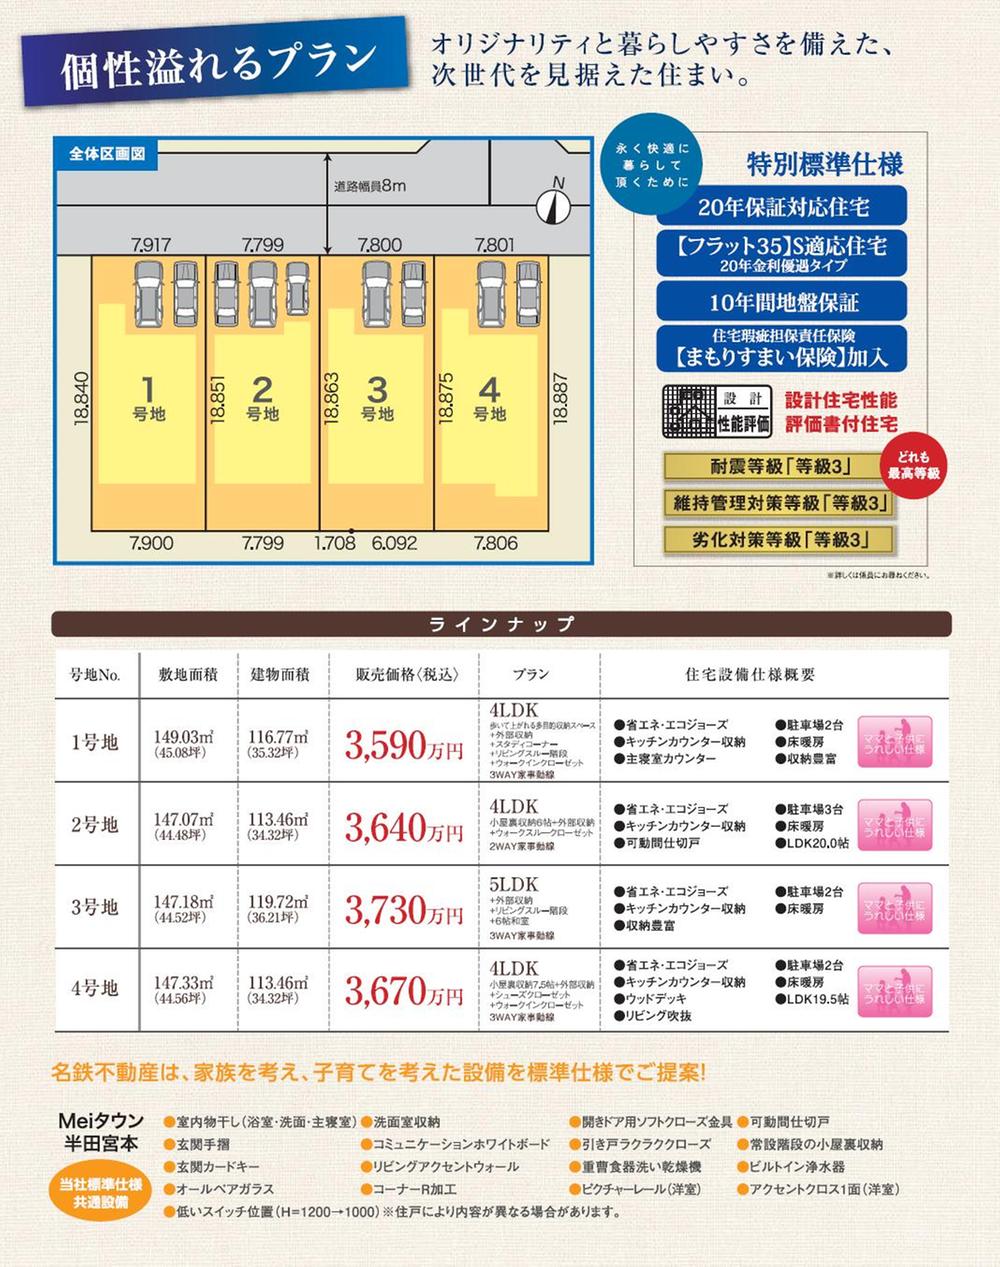 The entire compartment Figure. Land 45.08 square meters, Than 4LDK3590 yen of building 35.32 square meters, Land 44.52 square meters, All 4 House of 5LDK3730 yen of building 36.21 square meters